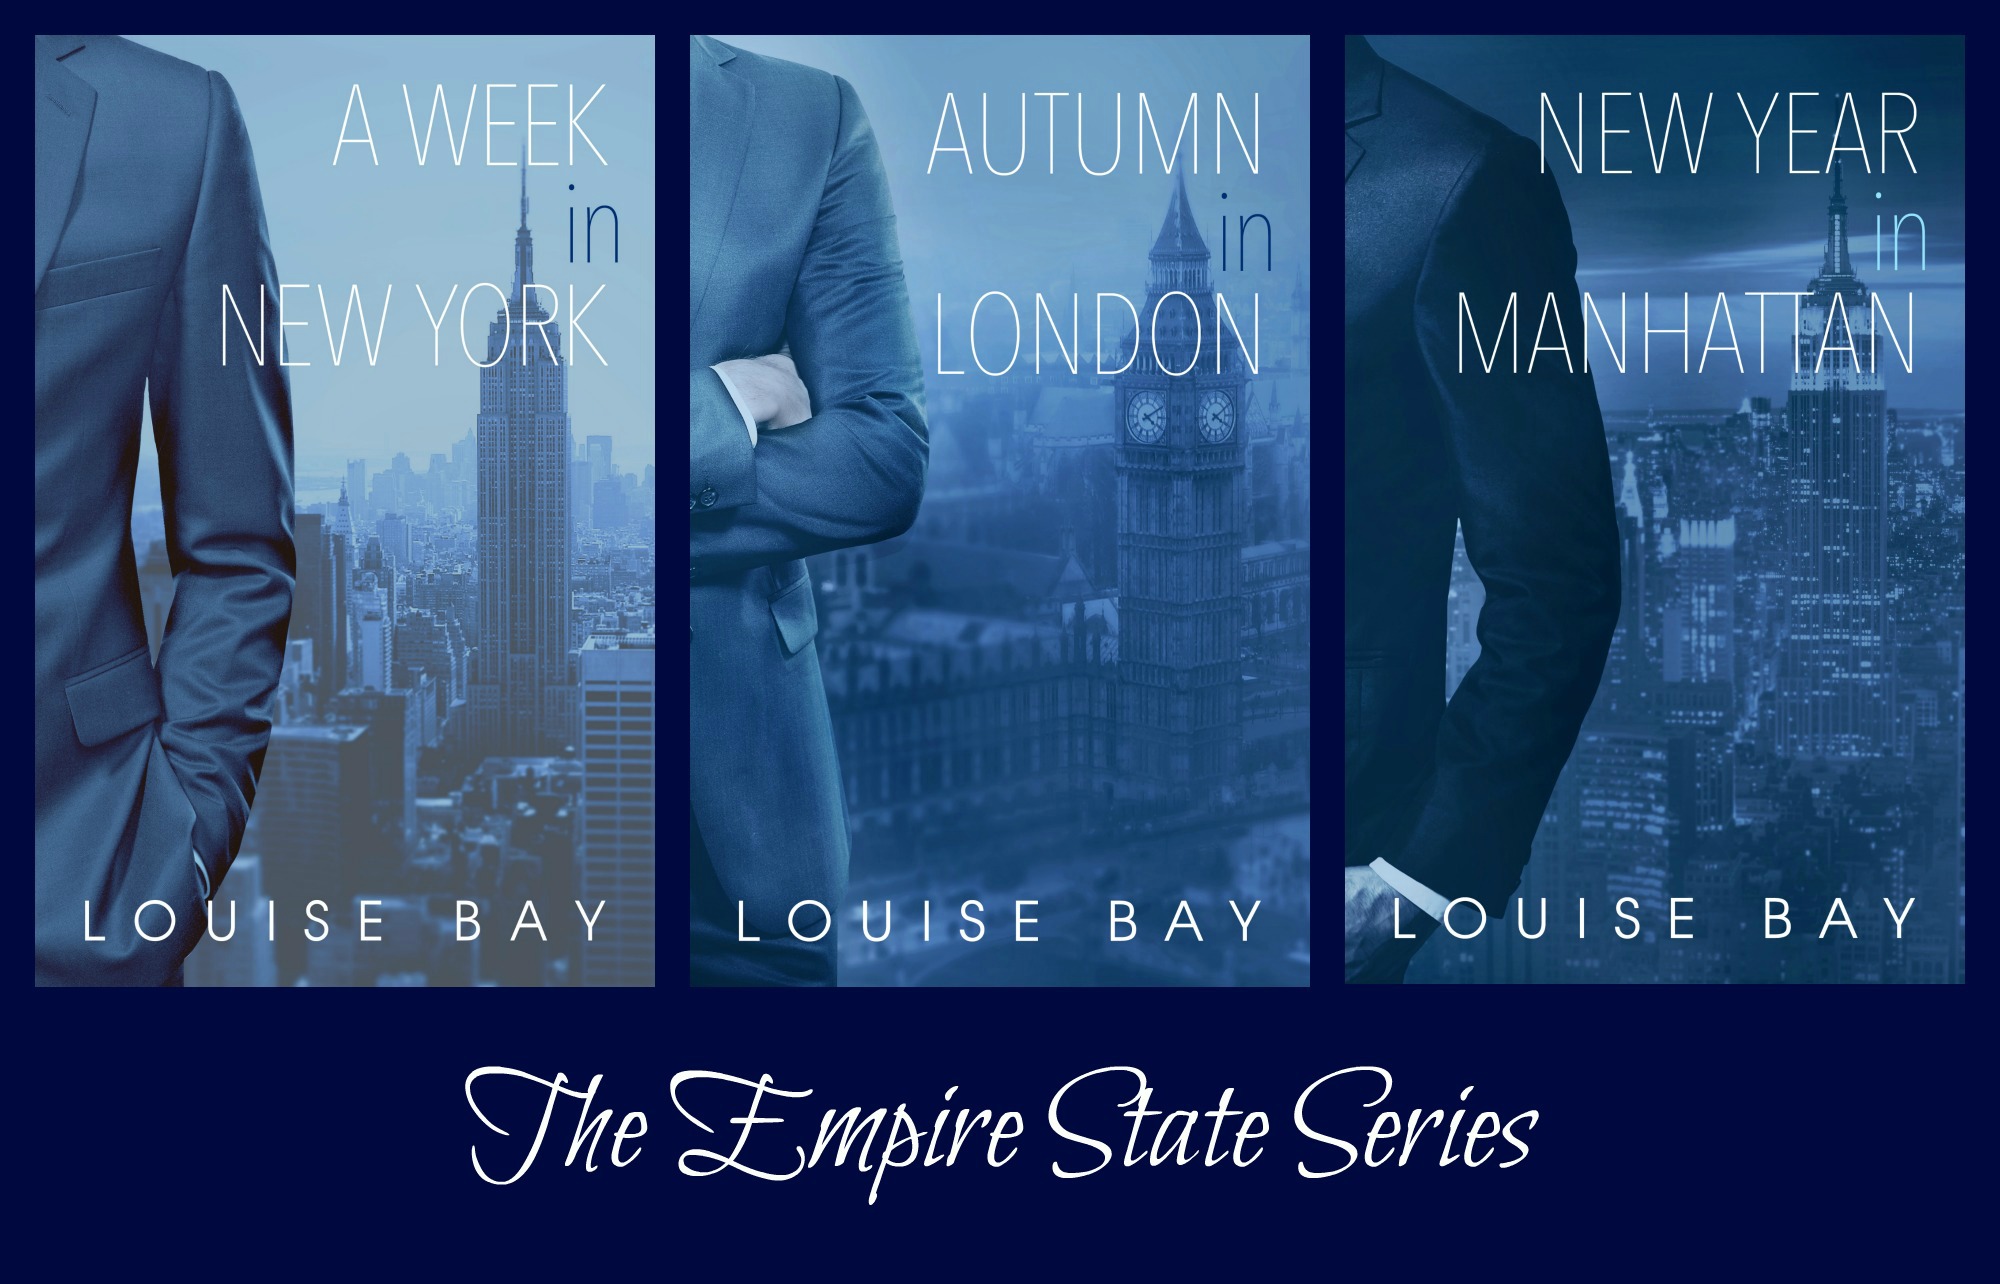 Autumn in London (The Empire State Series Book 2) eBook : Bay